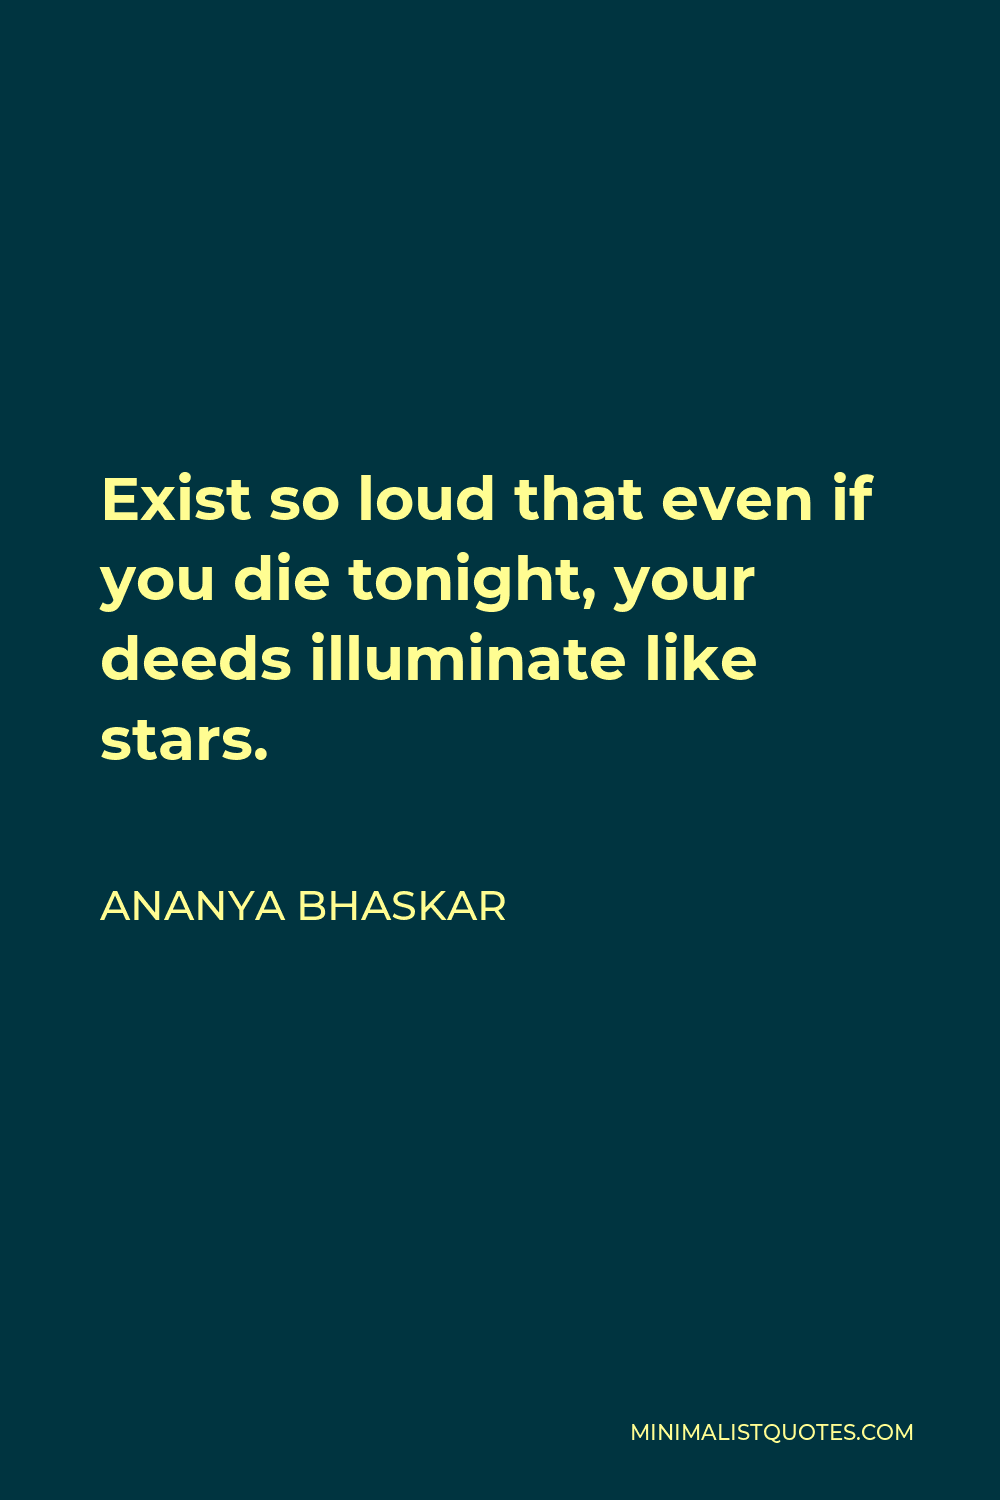 Ananya Bhaskar Quote - Exist so loud that even if you die tonight, your deeds illuminate like stars.